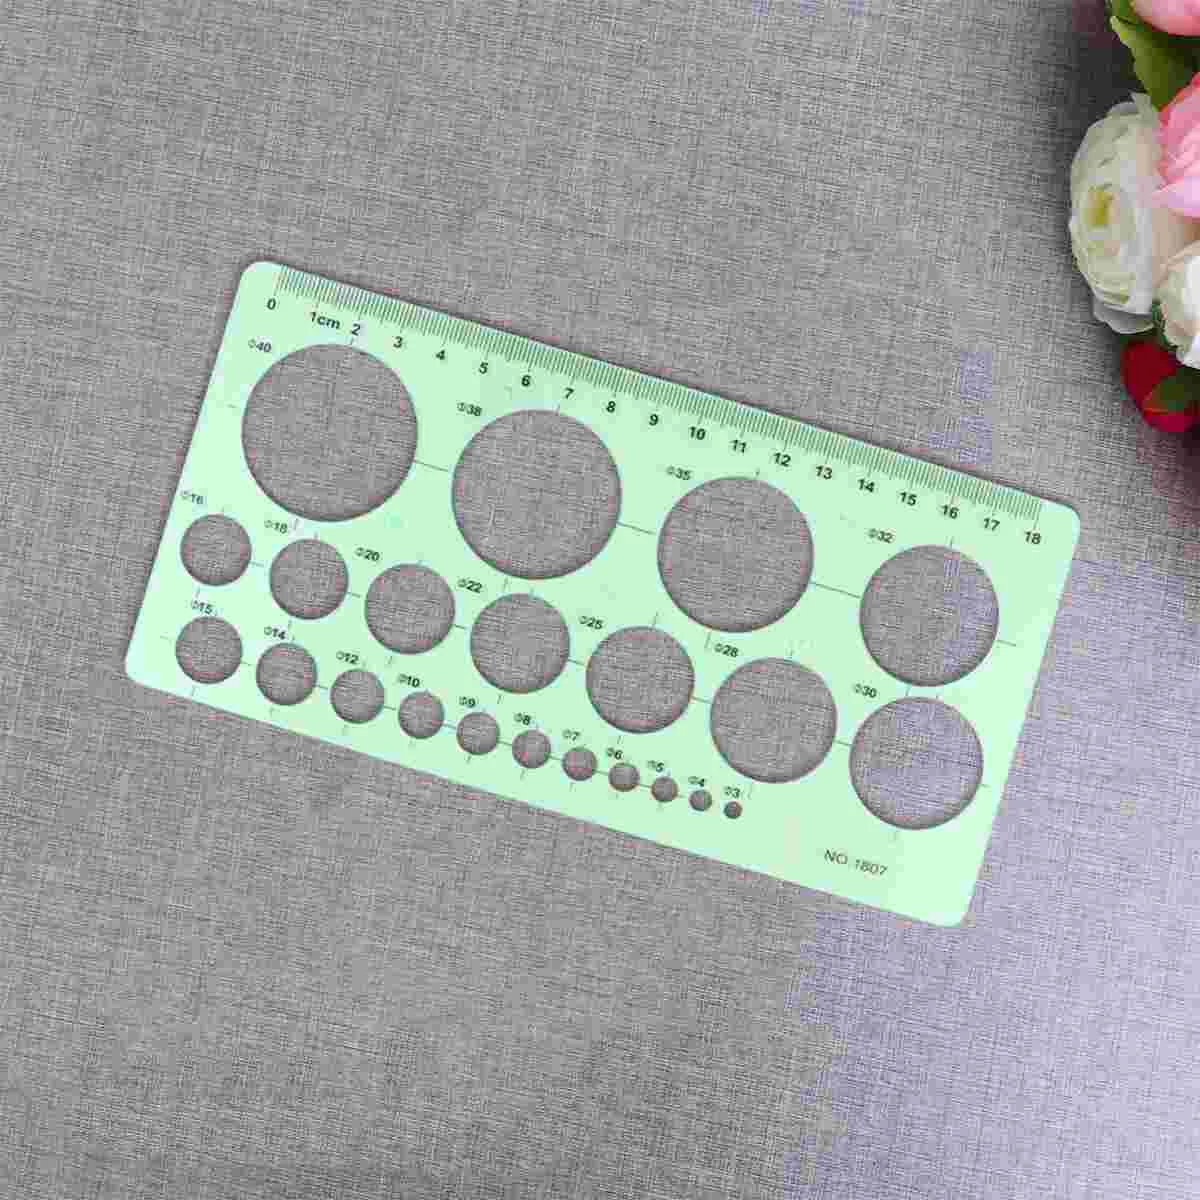 

3 Pieces Circle Template Drawings Templates Circle Oval Drawings Stencils Clear Measuring Rulers for Working Drawing Drafting